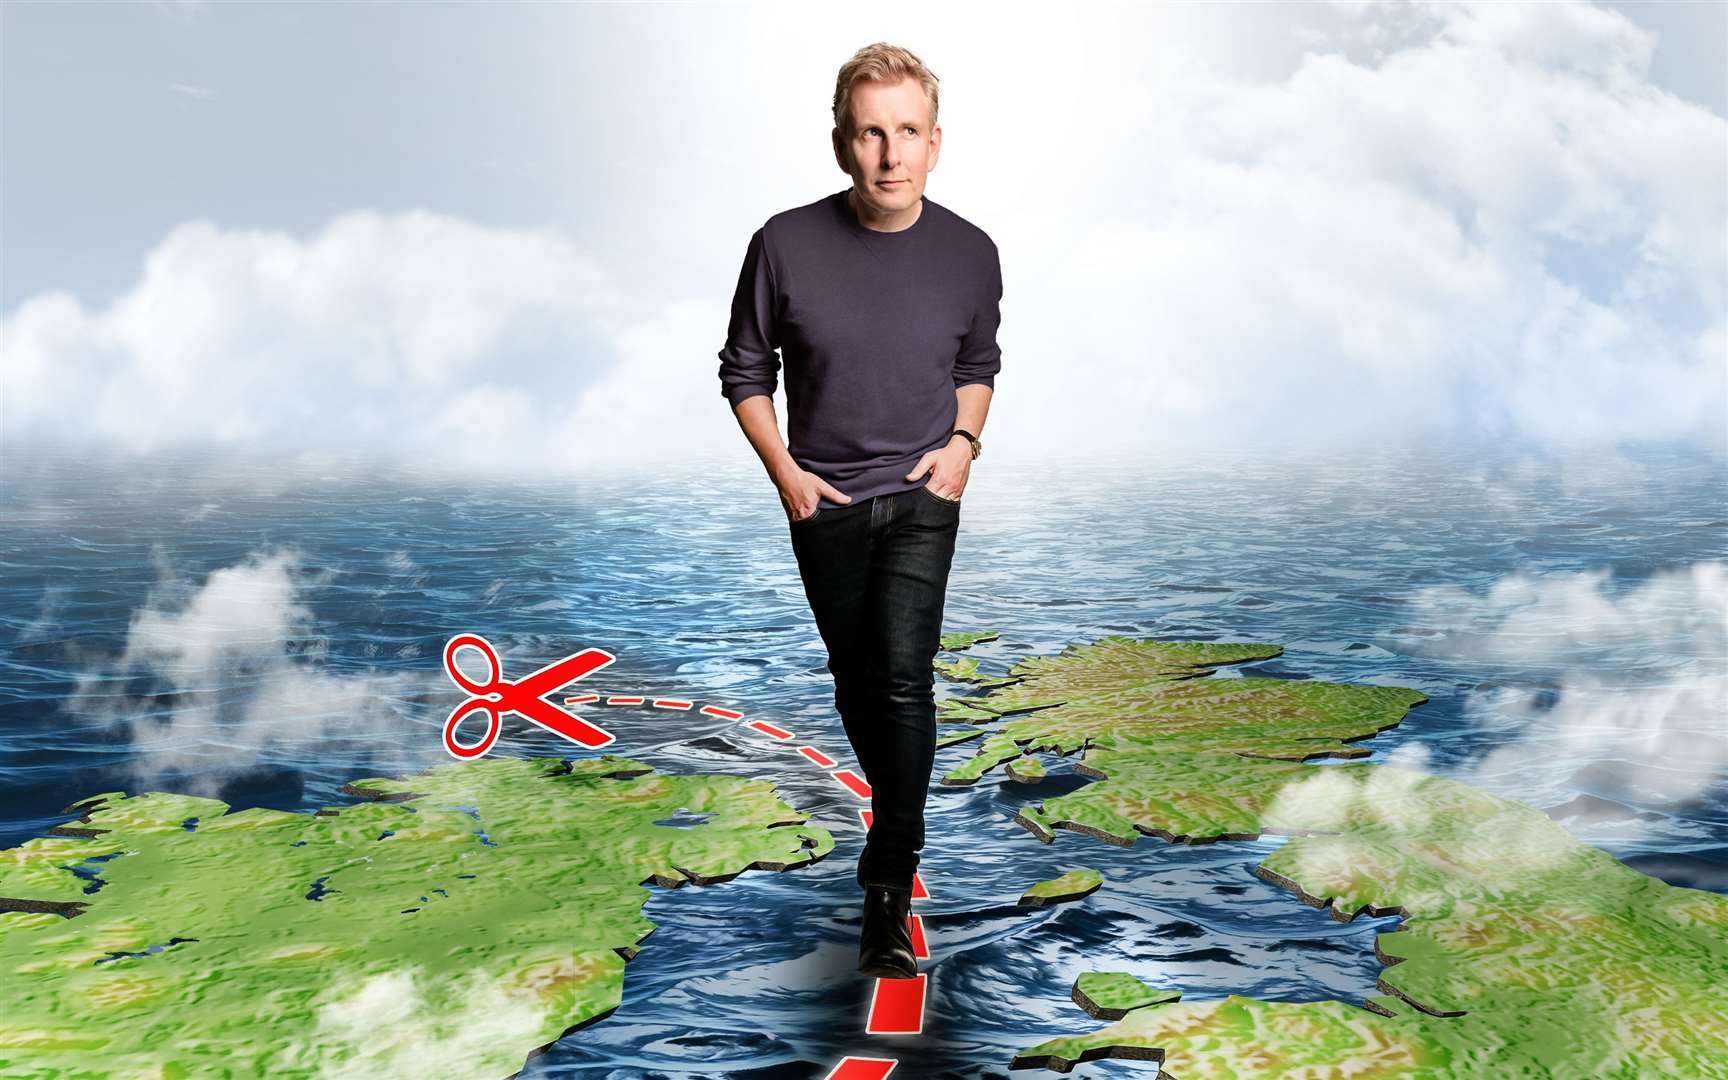 Northern Irish comedian Patrick Kielty is coming to the Gulbenkian in Canterbury on his first tour since 2015. Picture: Steve Ullathorne